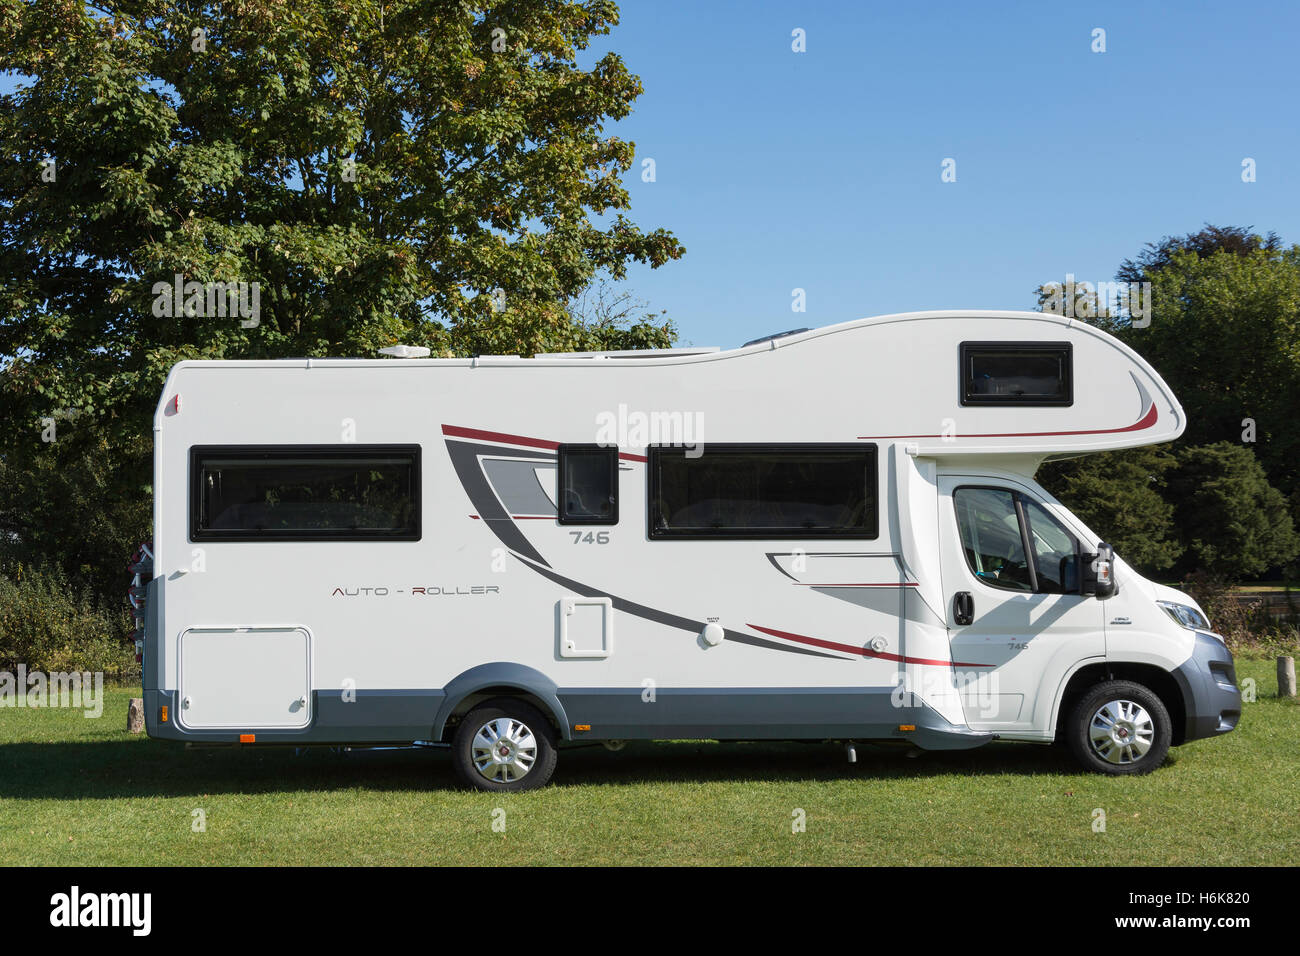 Auto-Roller 746 - Rollerteam motorhome by River Thames, Runnymede, Surrey, England, United Kingdom Stock Photo